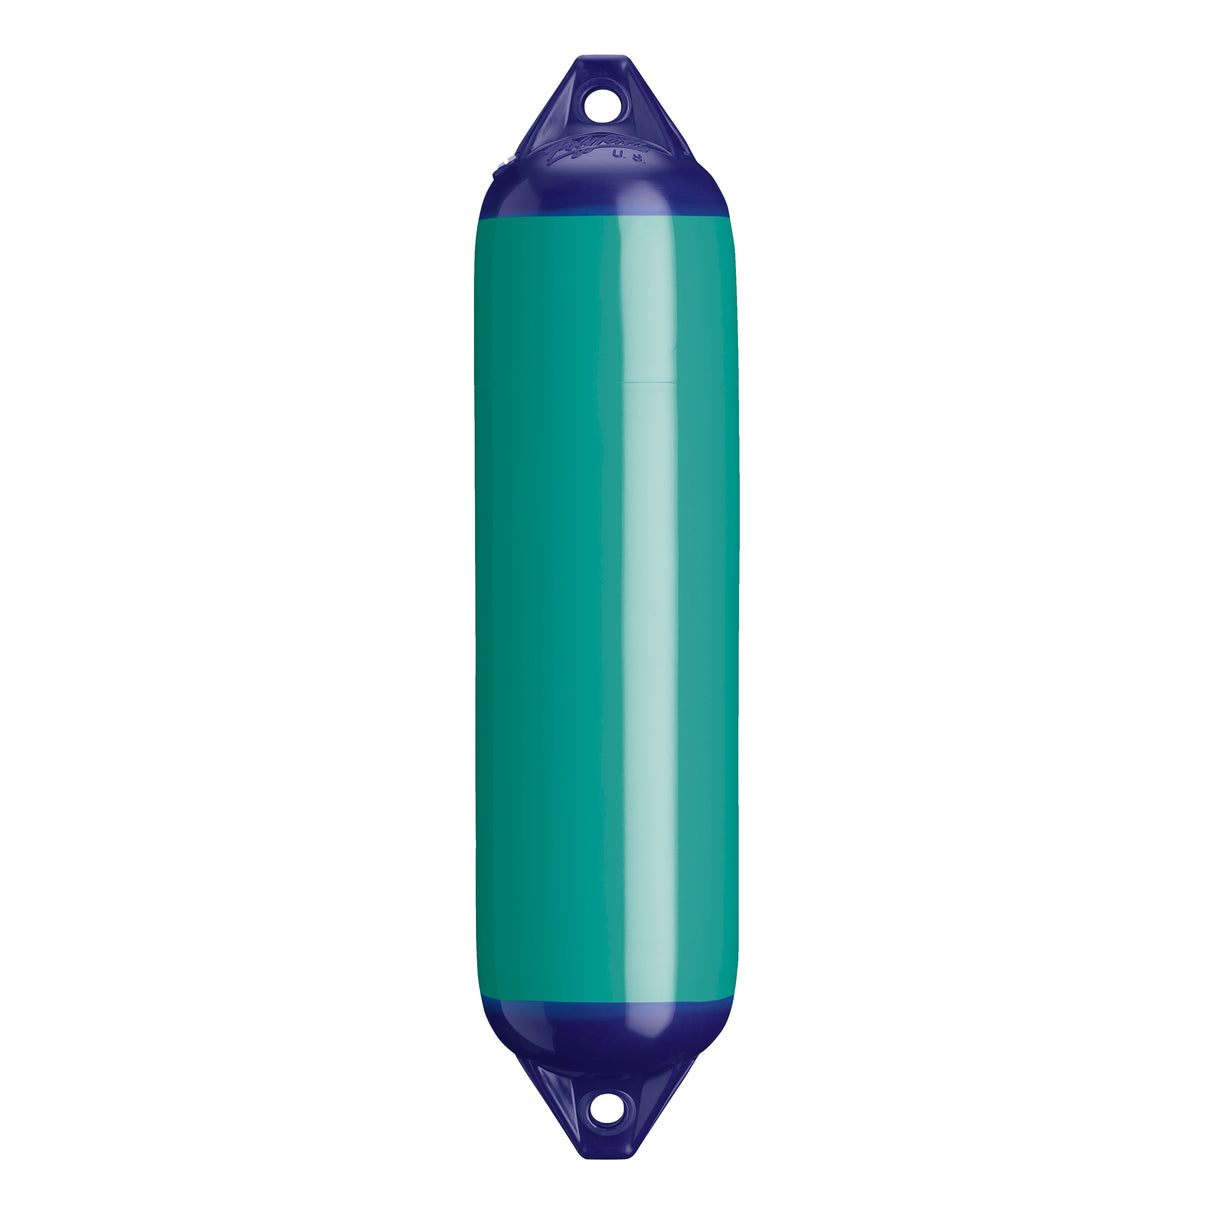 Teal boat fender with Navy-Top, Polyform F-1 